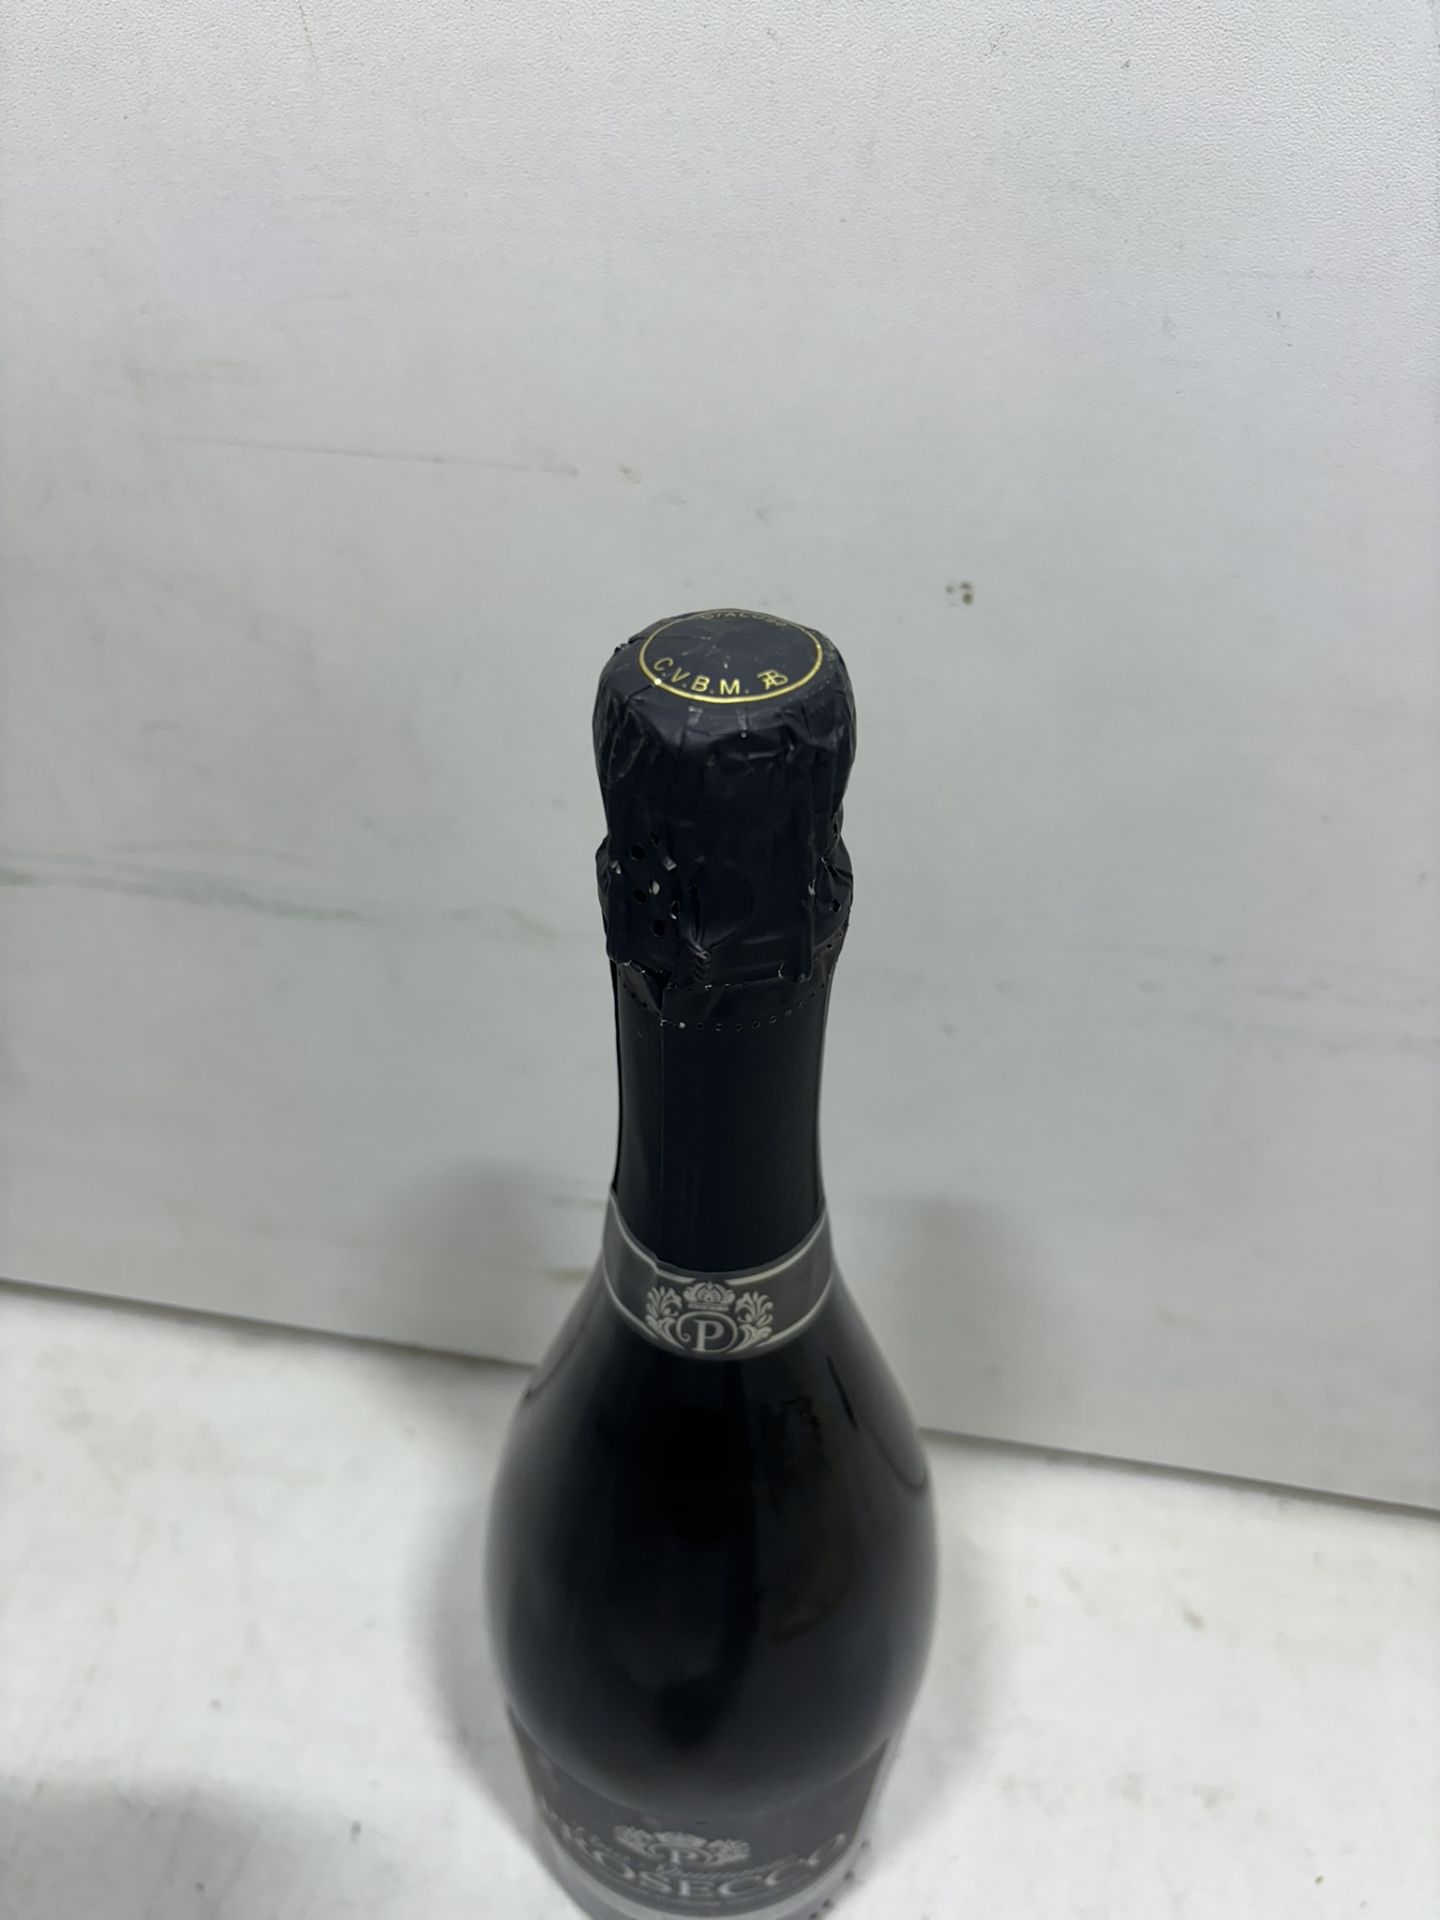 7 X Bottles Of Prosecco Vino Spumante Extra Dry 75Cl - Image 4 of 4